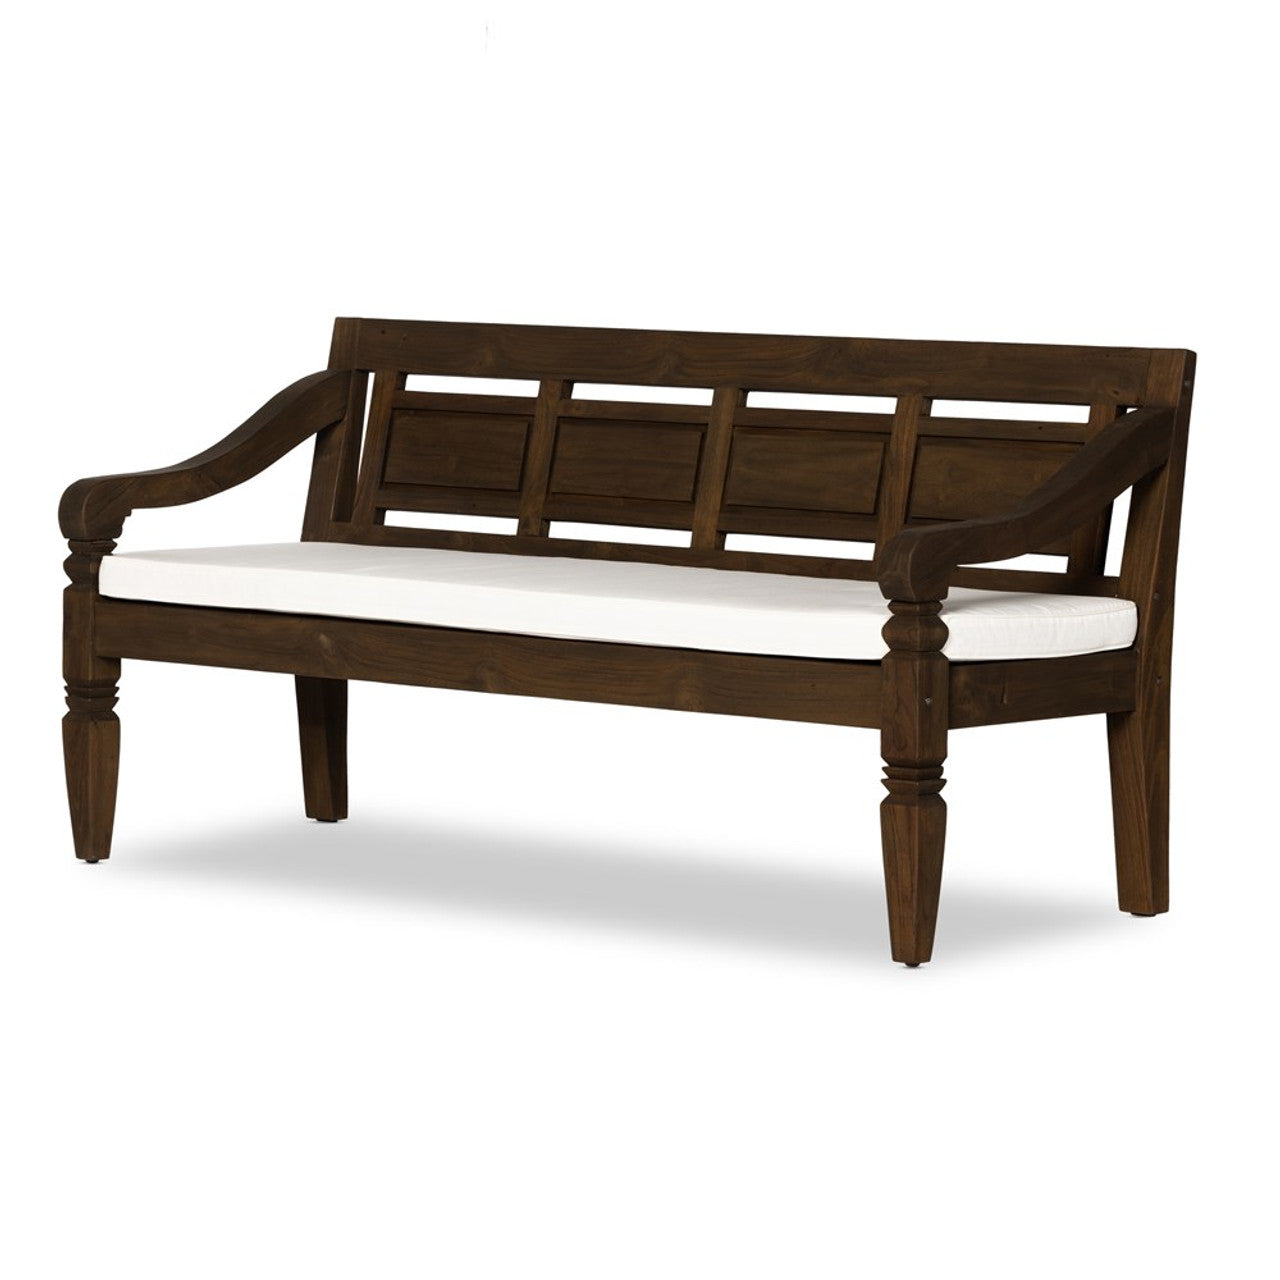 Foles Outdoor Bench - Brown